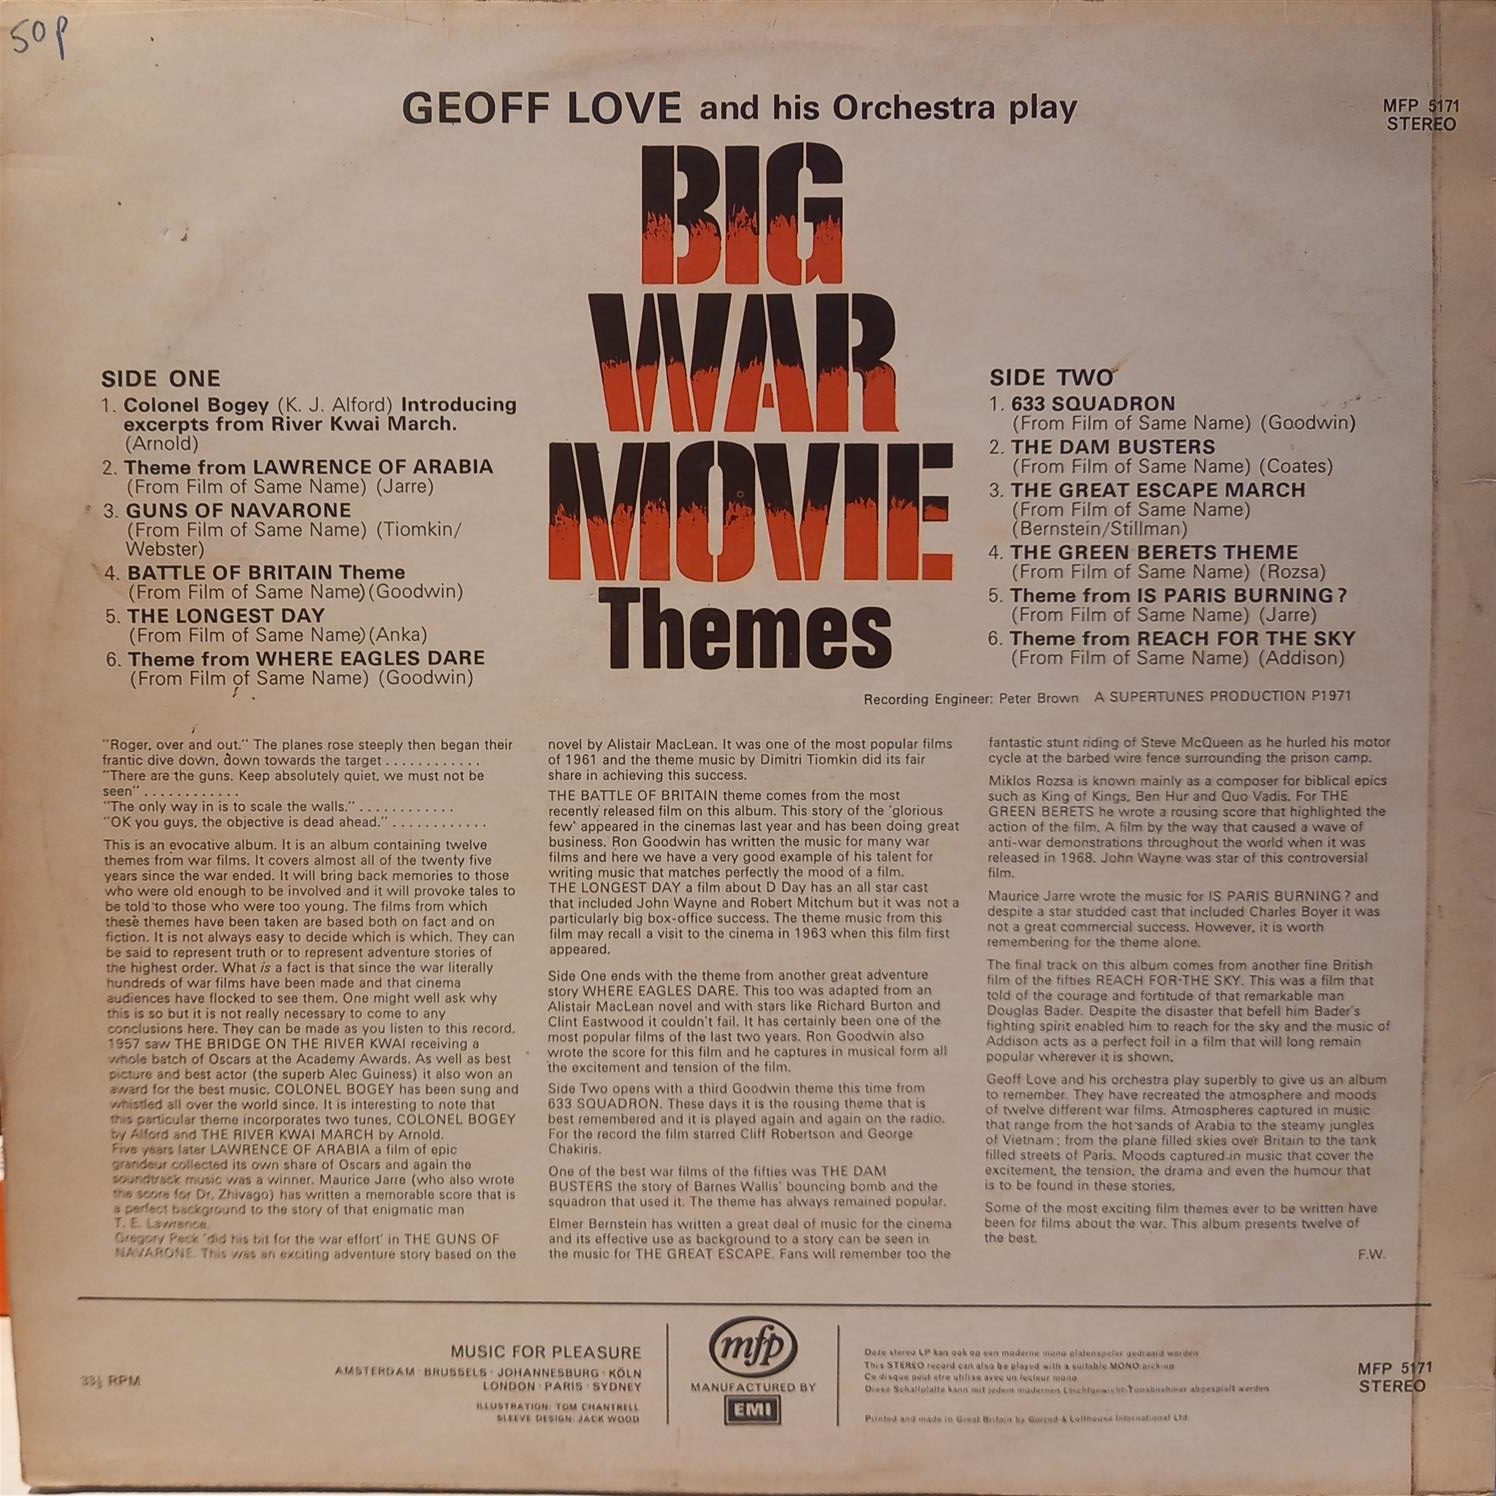 GEOFF LOVE AND HIS ORCHESTRA – BIG WAR MOVIE THEMES ARKA